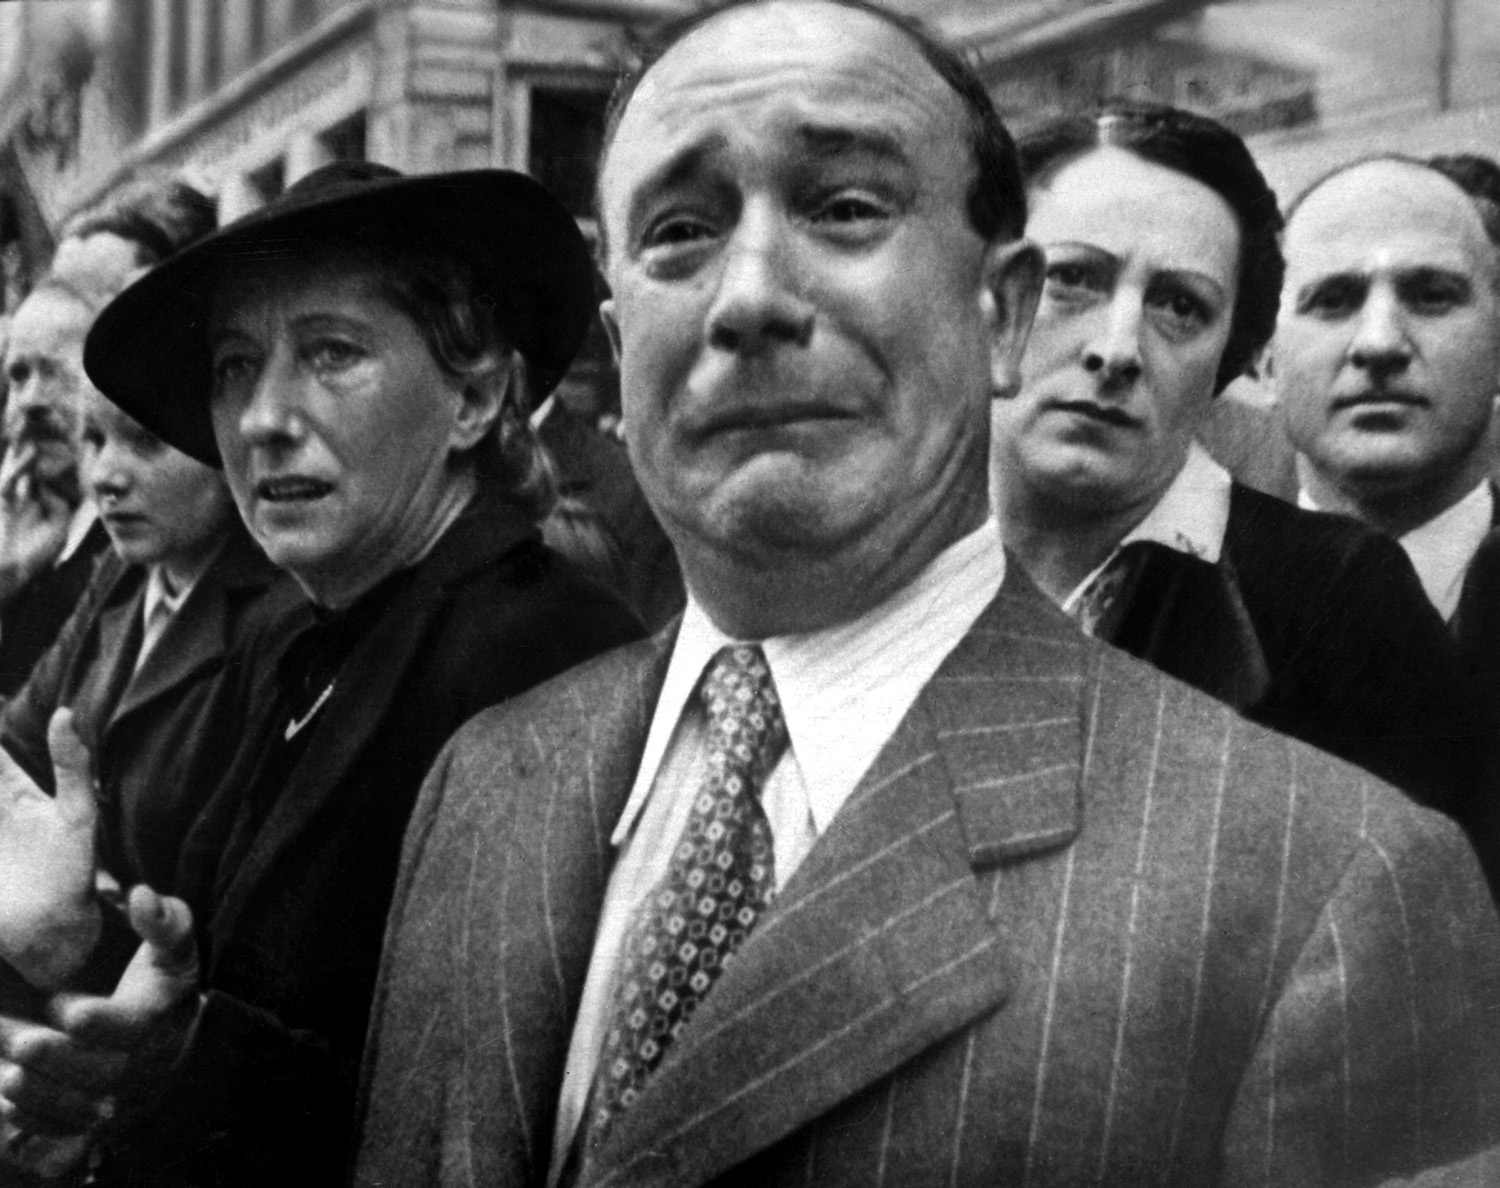 A still from Frank Capra’s film, Divide and Conquer, the third film in the Why We Fight series, shows French civilians watching as the French Army leaves France from Toulon Harbor in 1940, later to become part of the Free French forces.